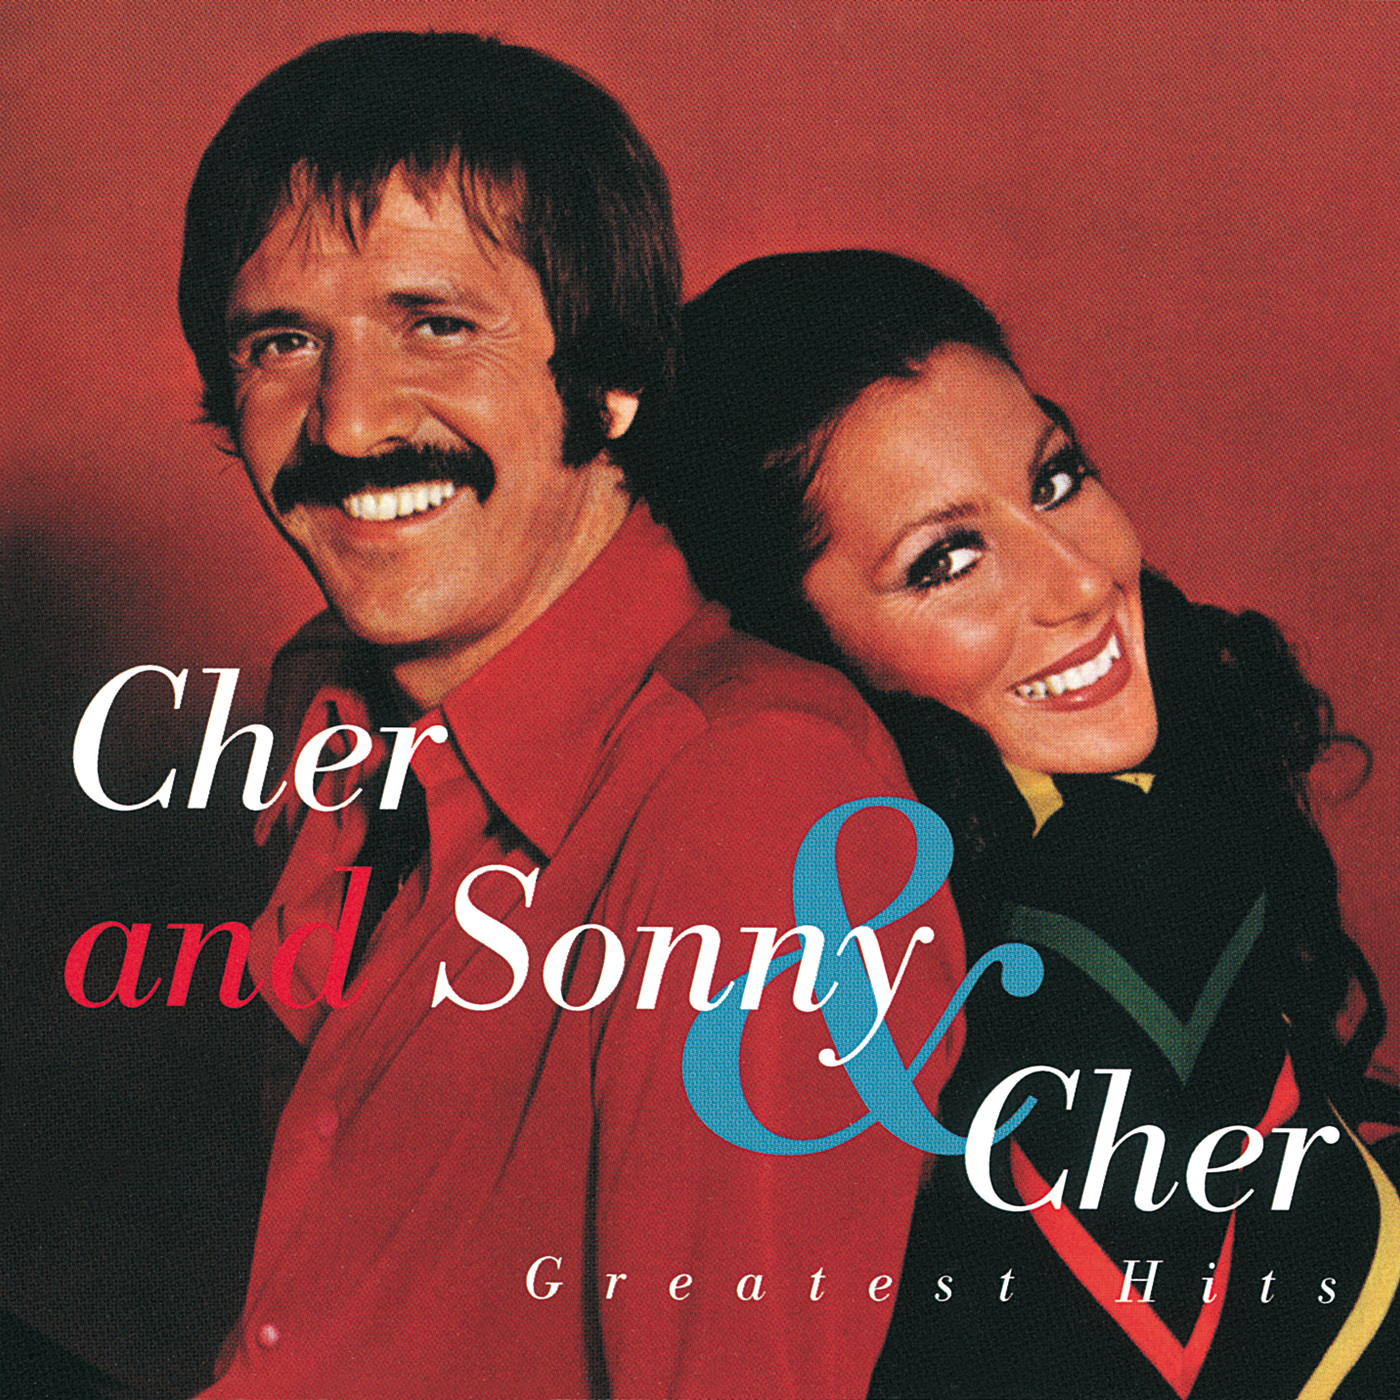 Шер little man. Little man Сонни и Шер. Сонни и Шер обложки альбомов. Sonny & cher - the Singles. A Cowboy s work is never done Sonny cher.